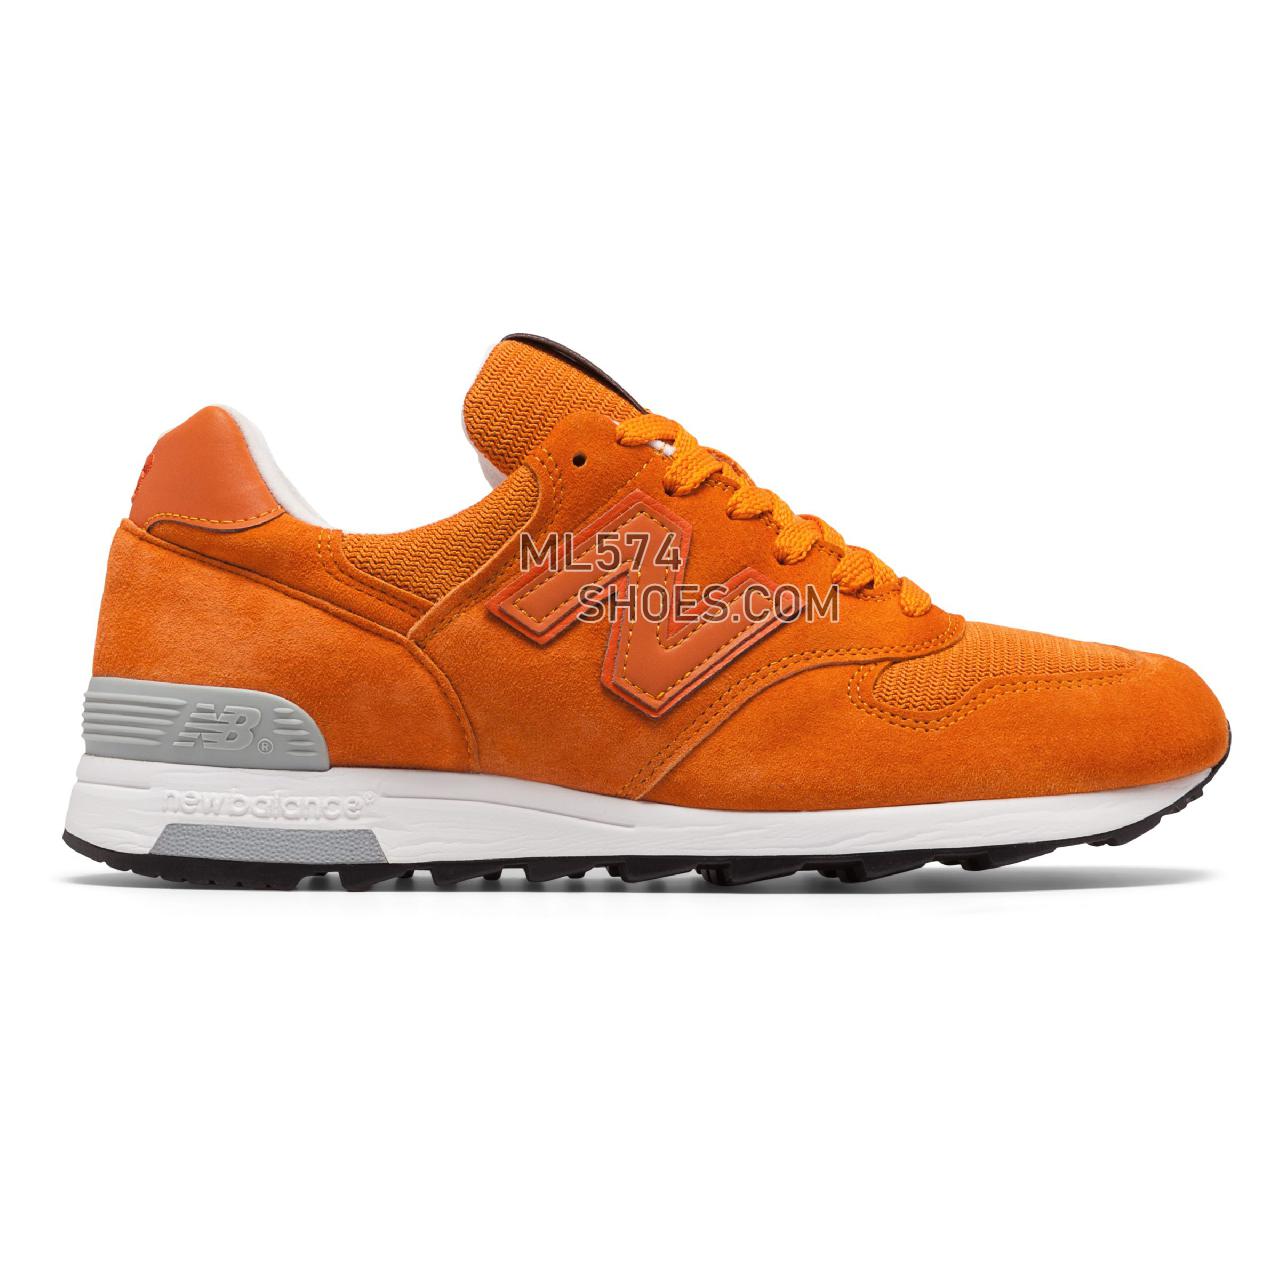 New Balance 1400 Made in US - Men's 1400 - Classic Orange with White - M1400WC